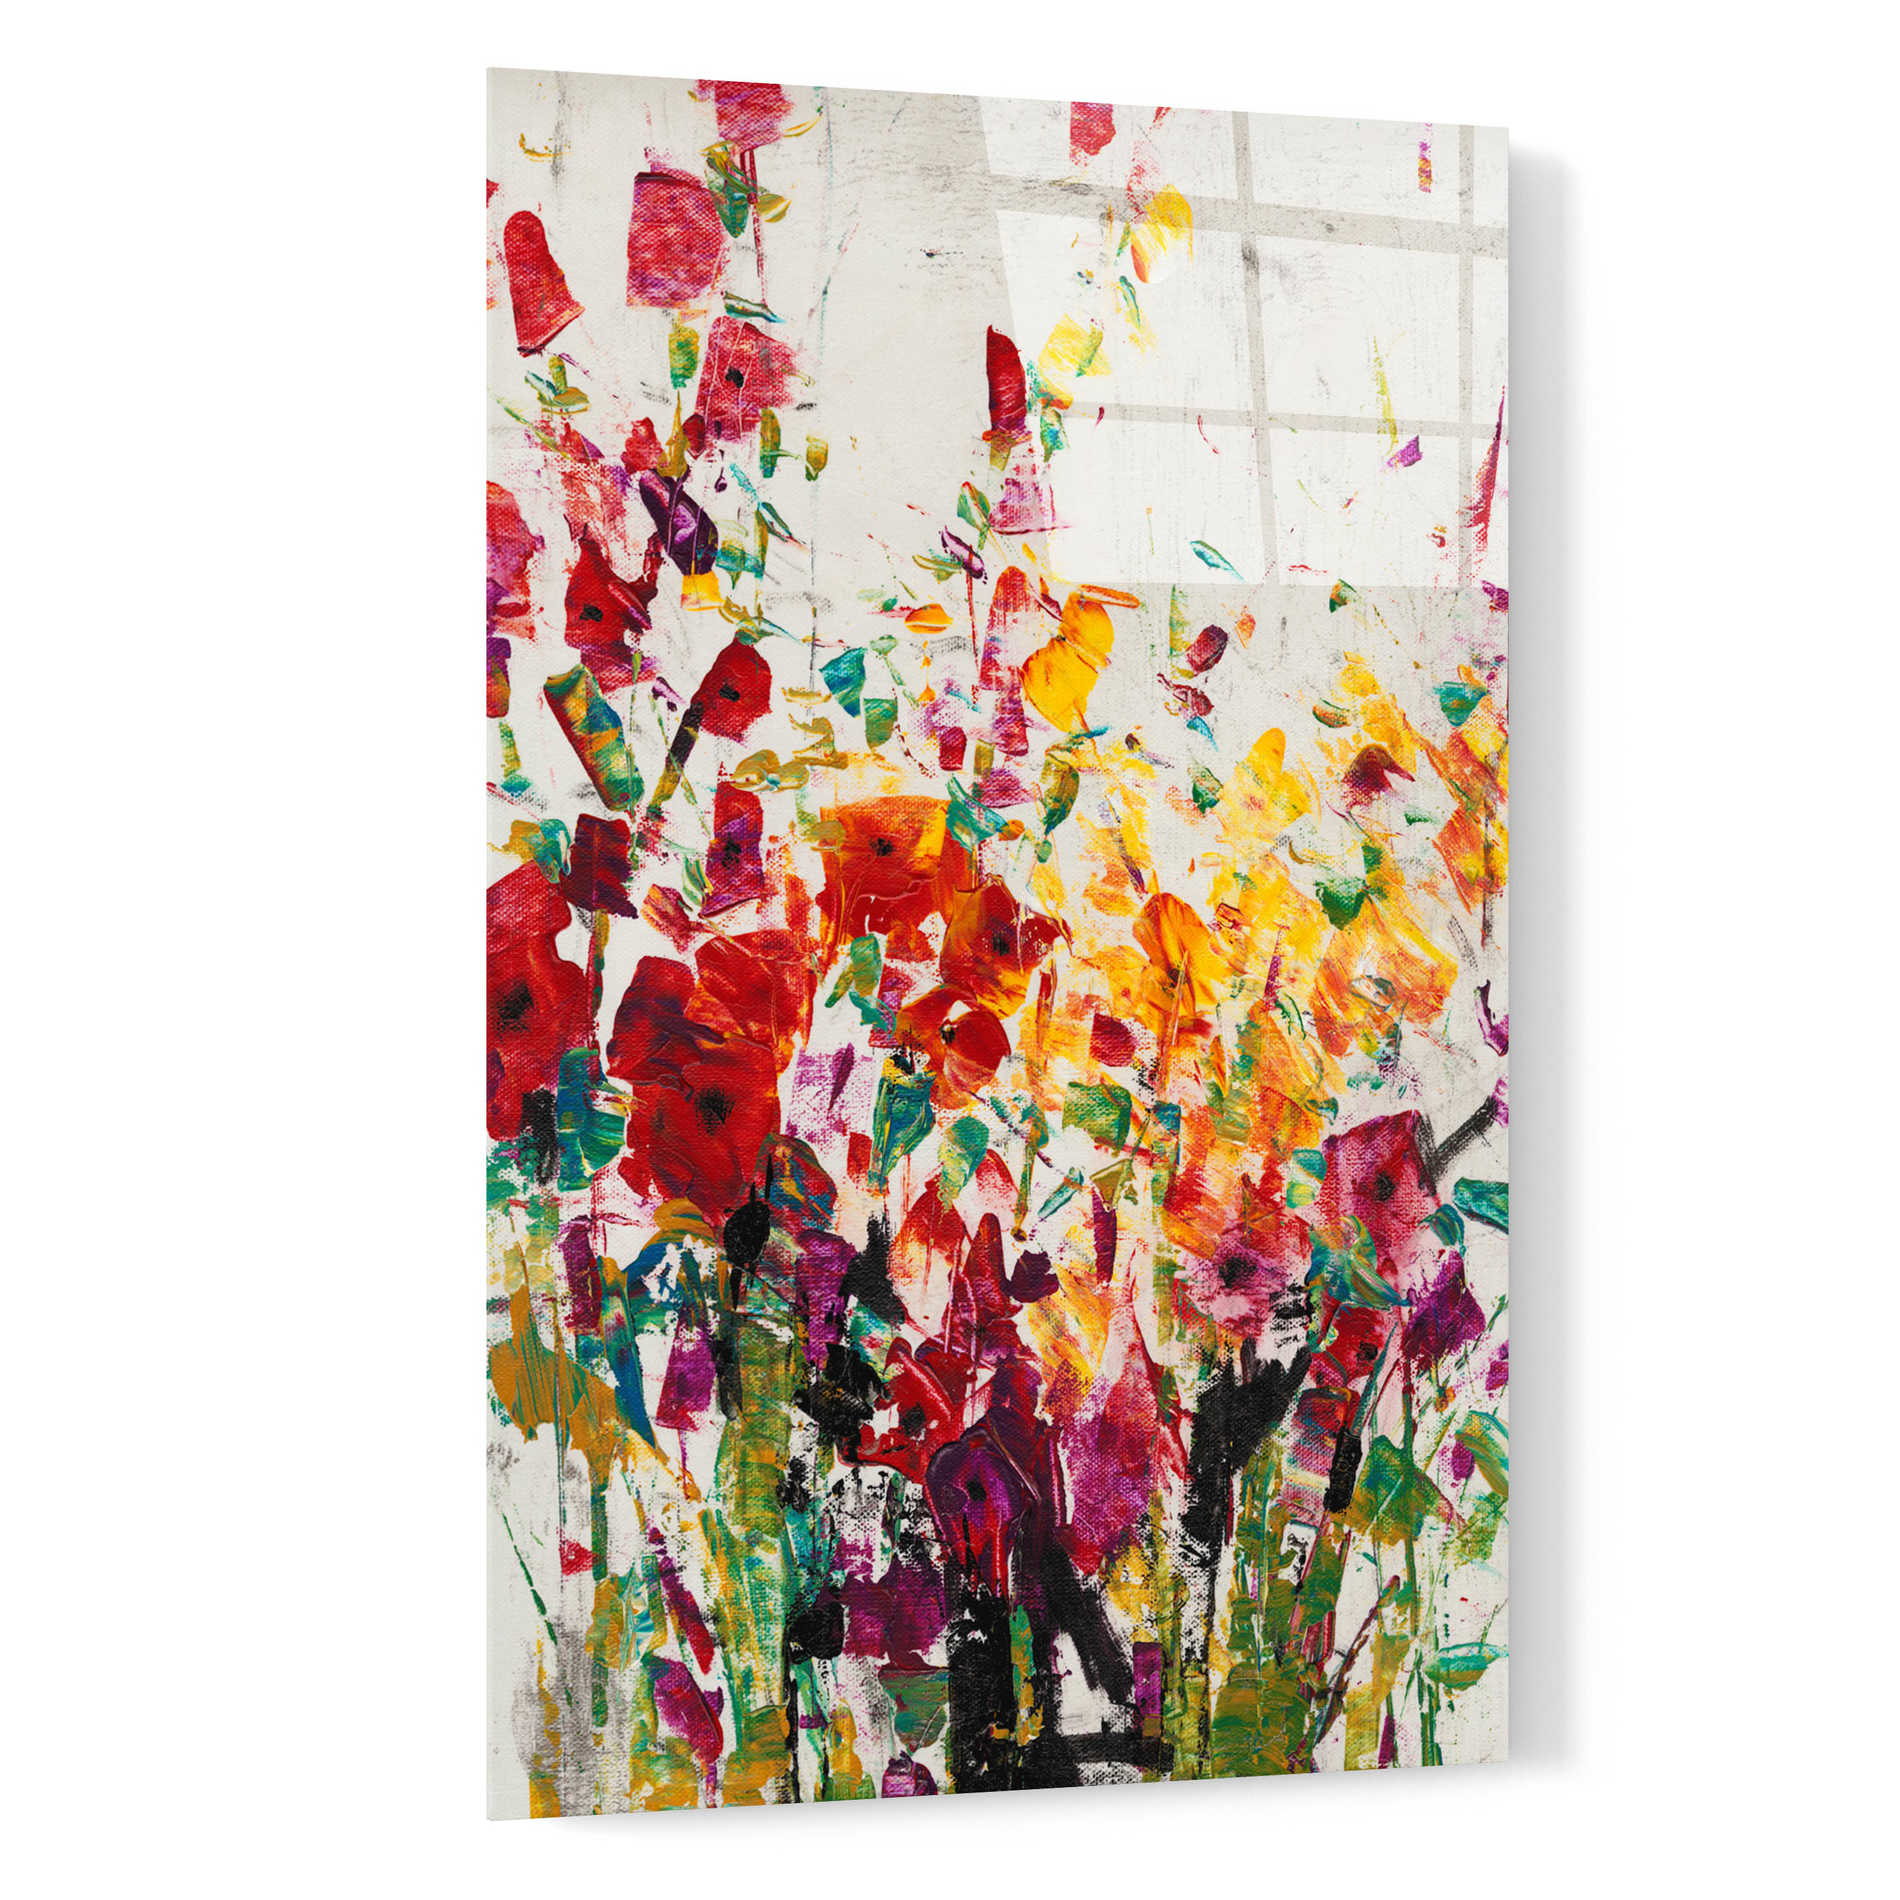 Epic Art 'Wildflowers Blooming I' by Tim O'Toole, Acrylic Glass Wall Art,16x24